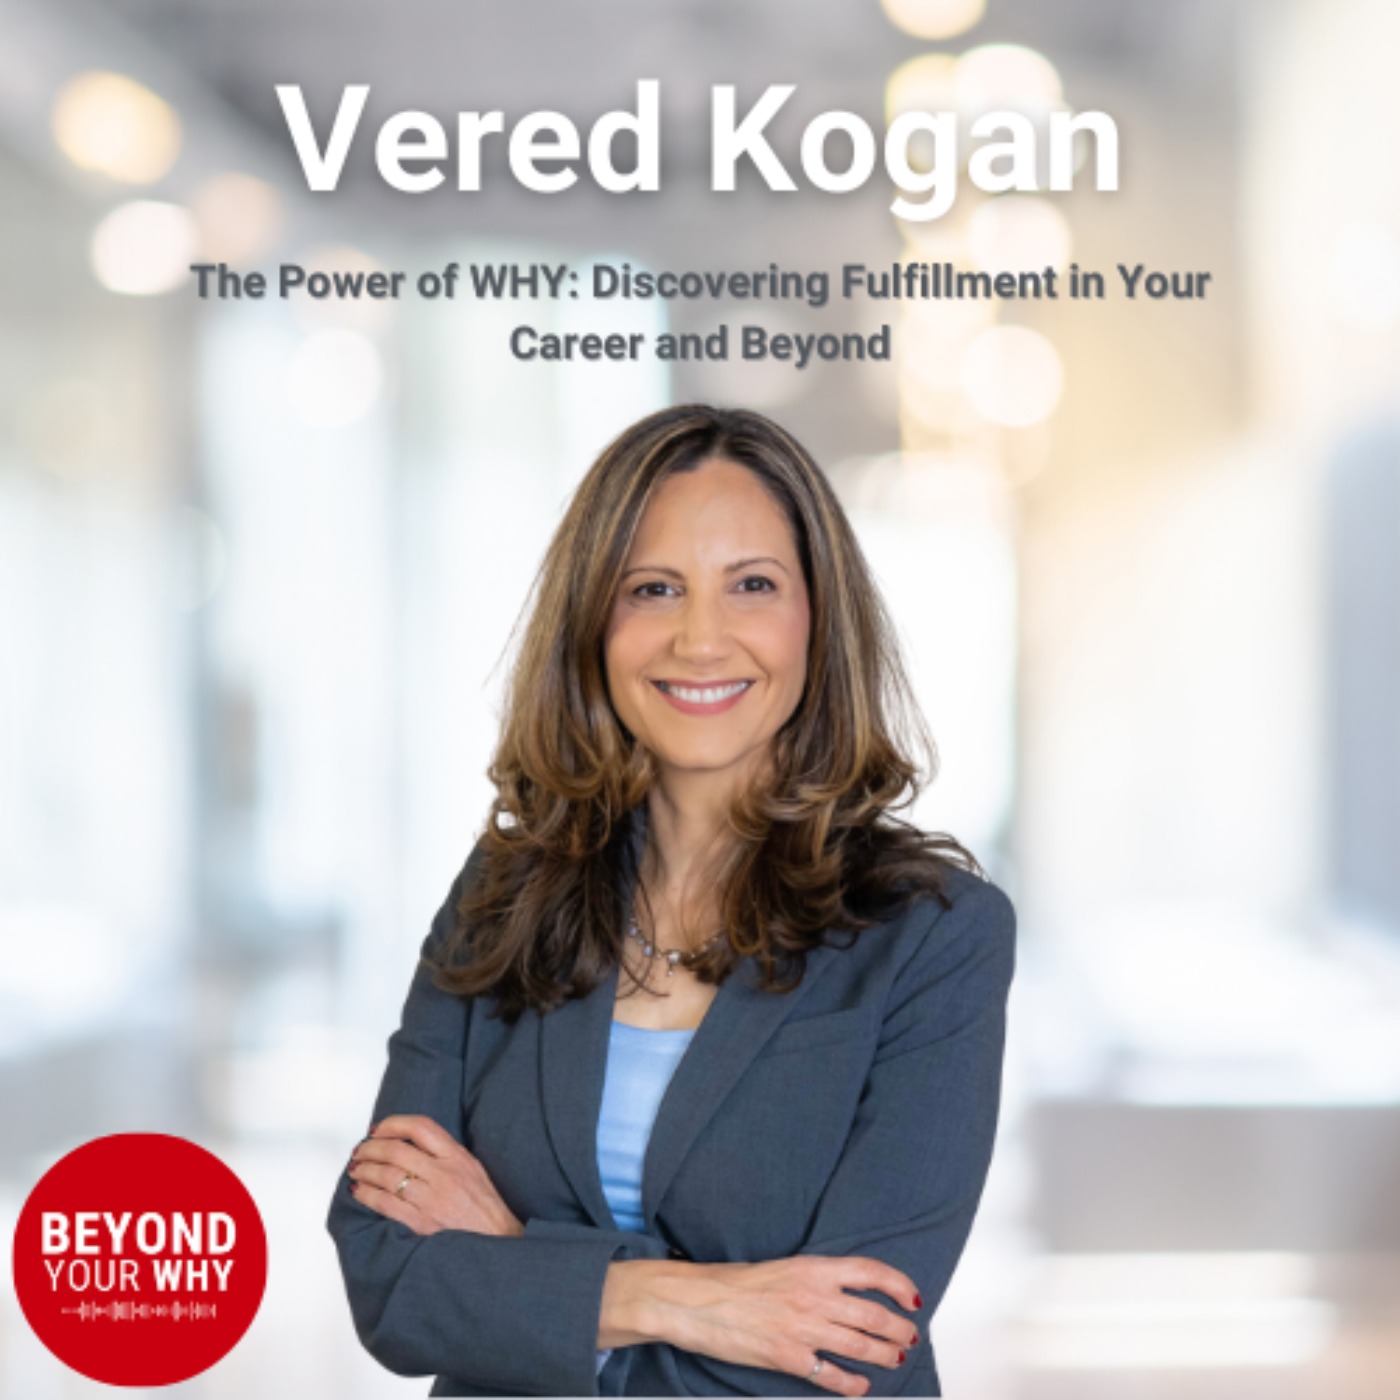 The Power of WHY: Discovering Fulfillment in Your Career and Beyond